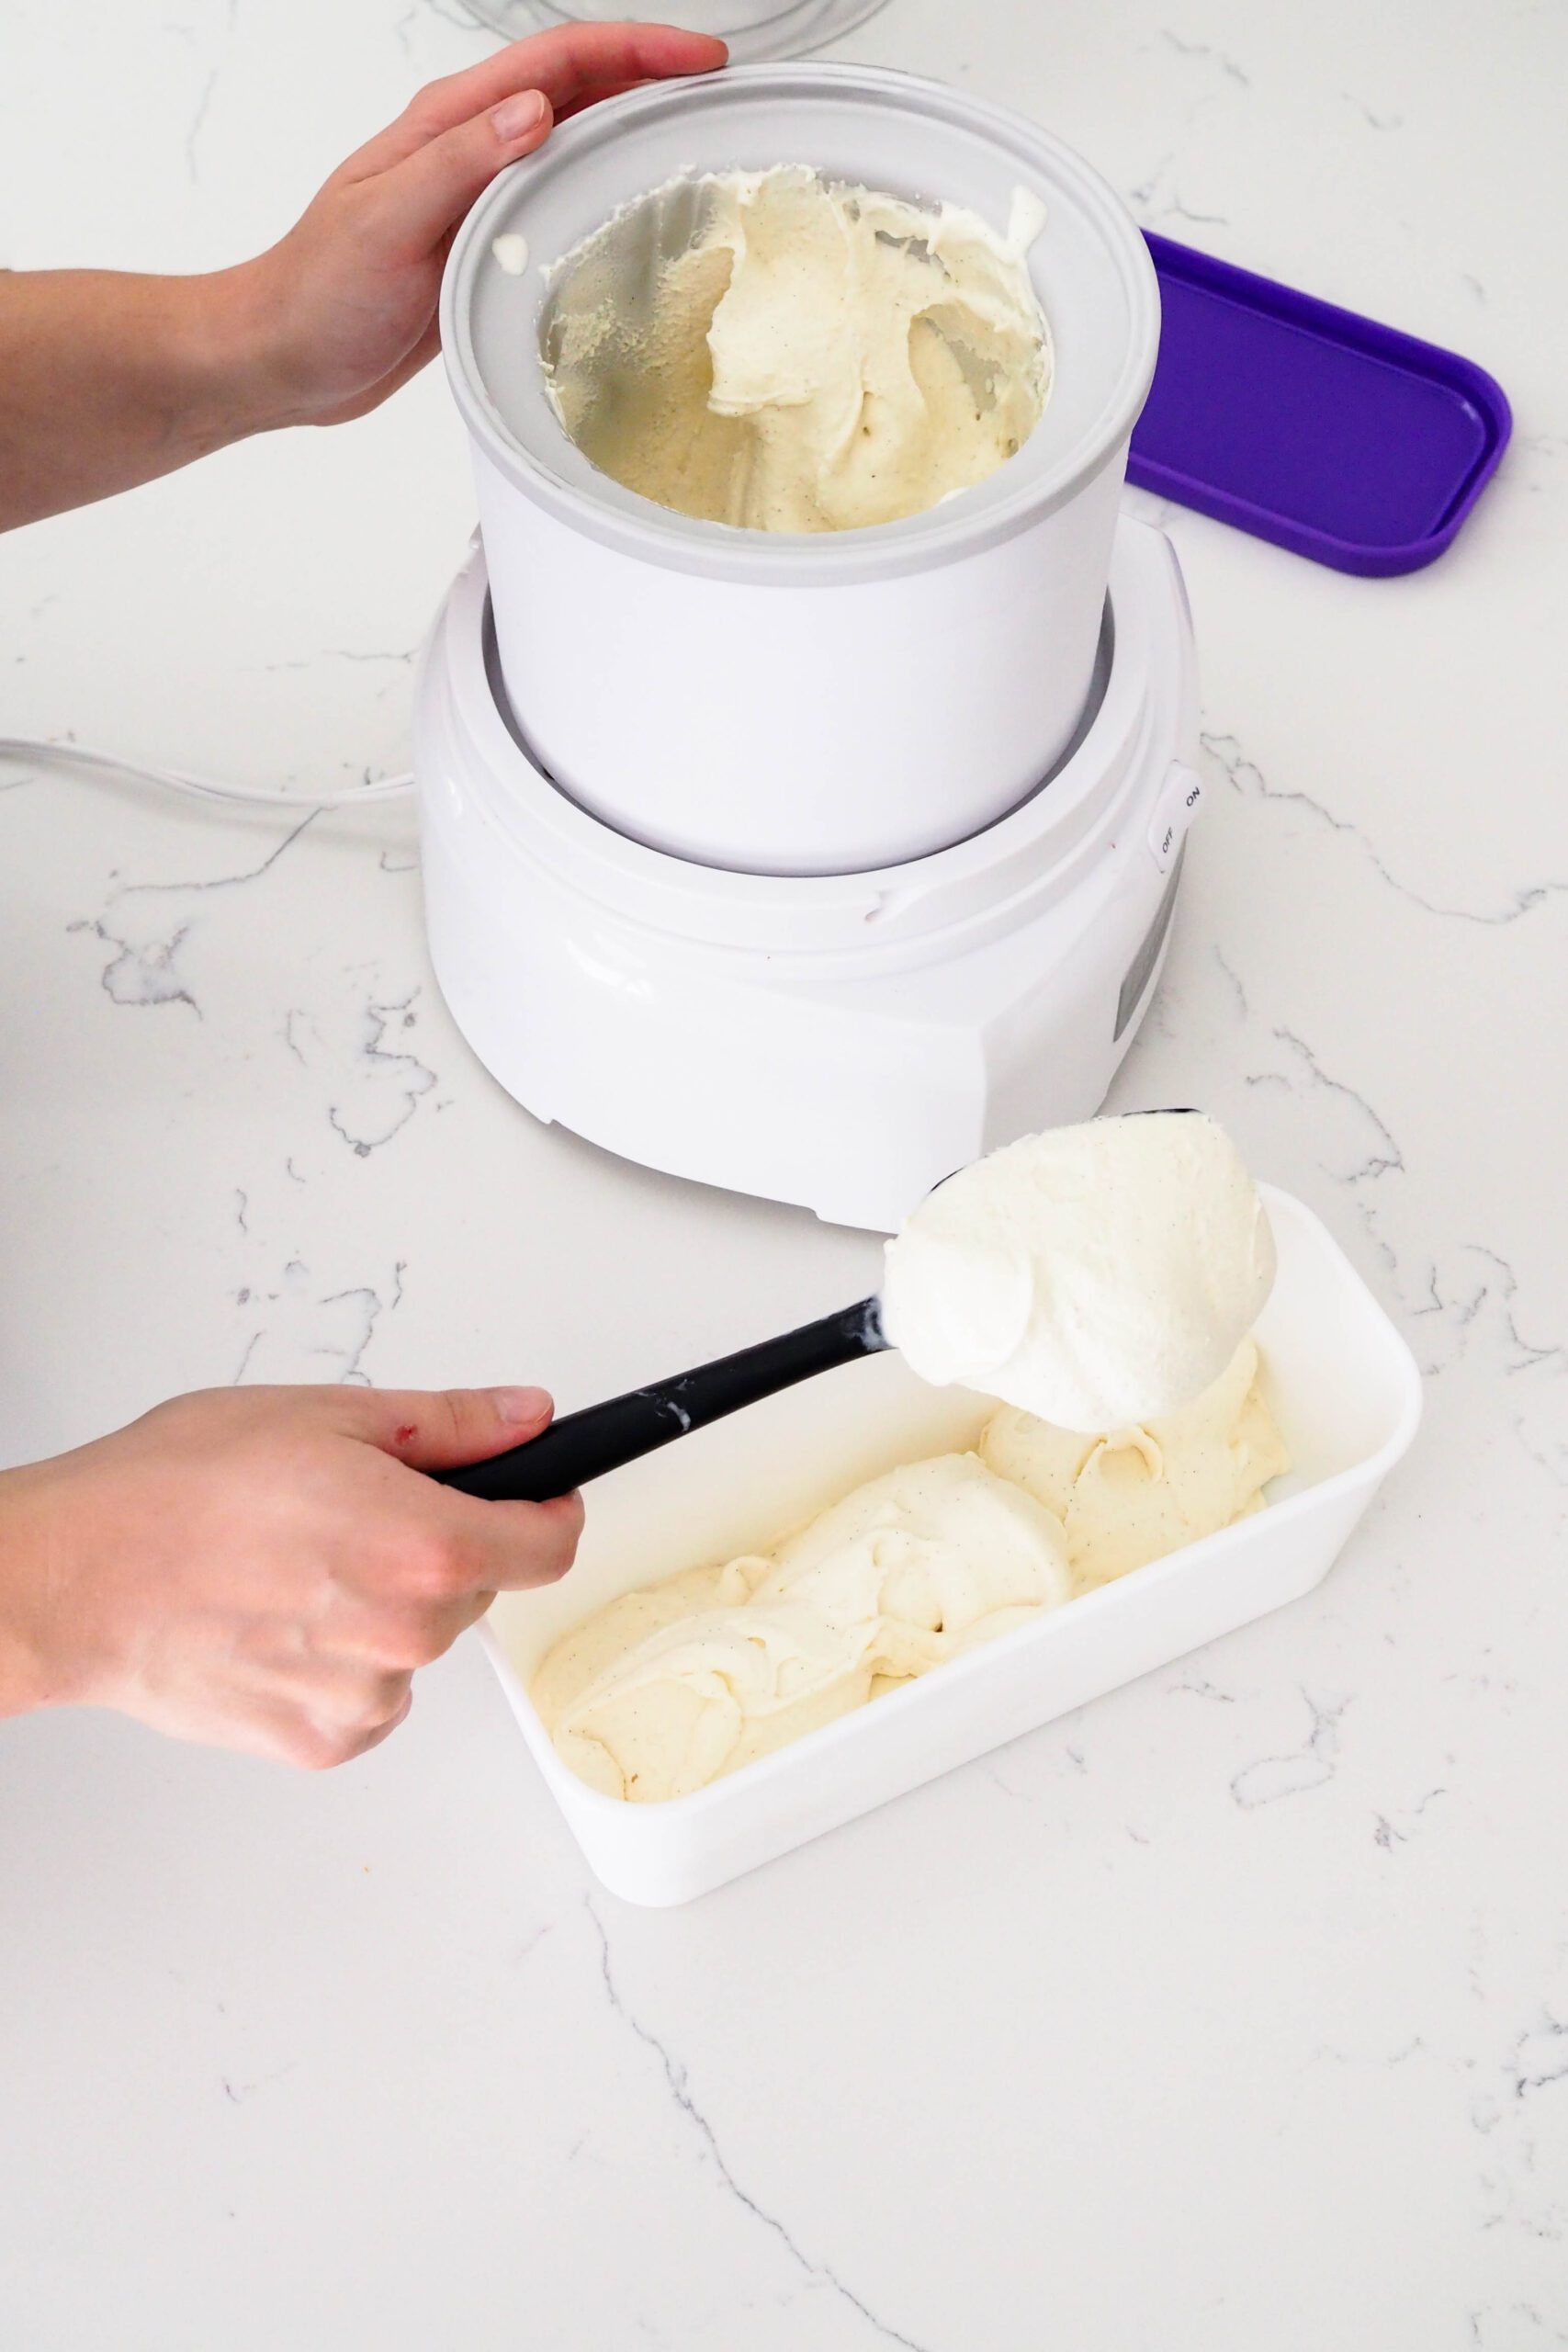 A hand scoops ice cream out of an ice cream maker canister and into a rectangular container.